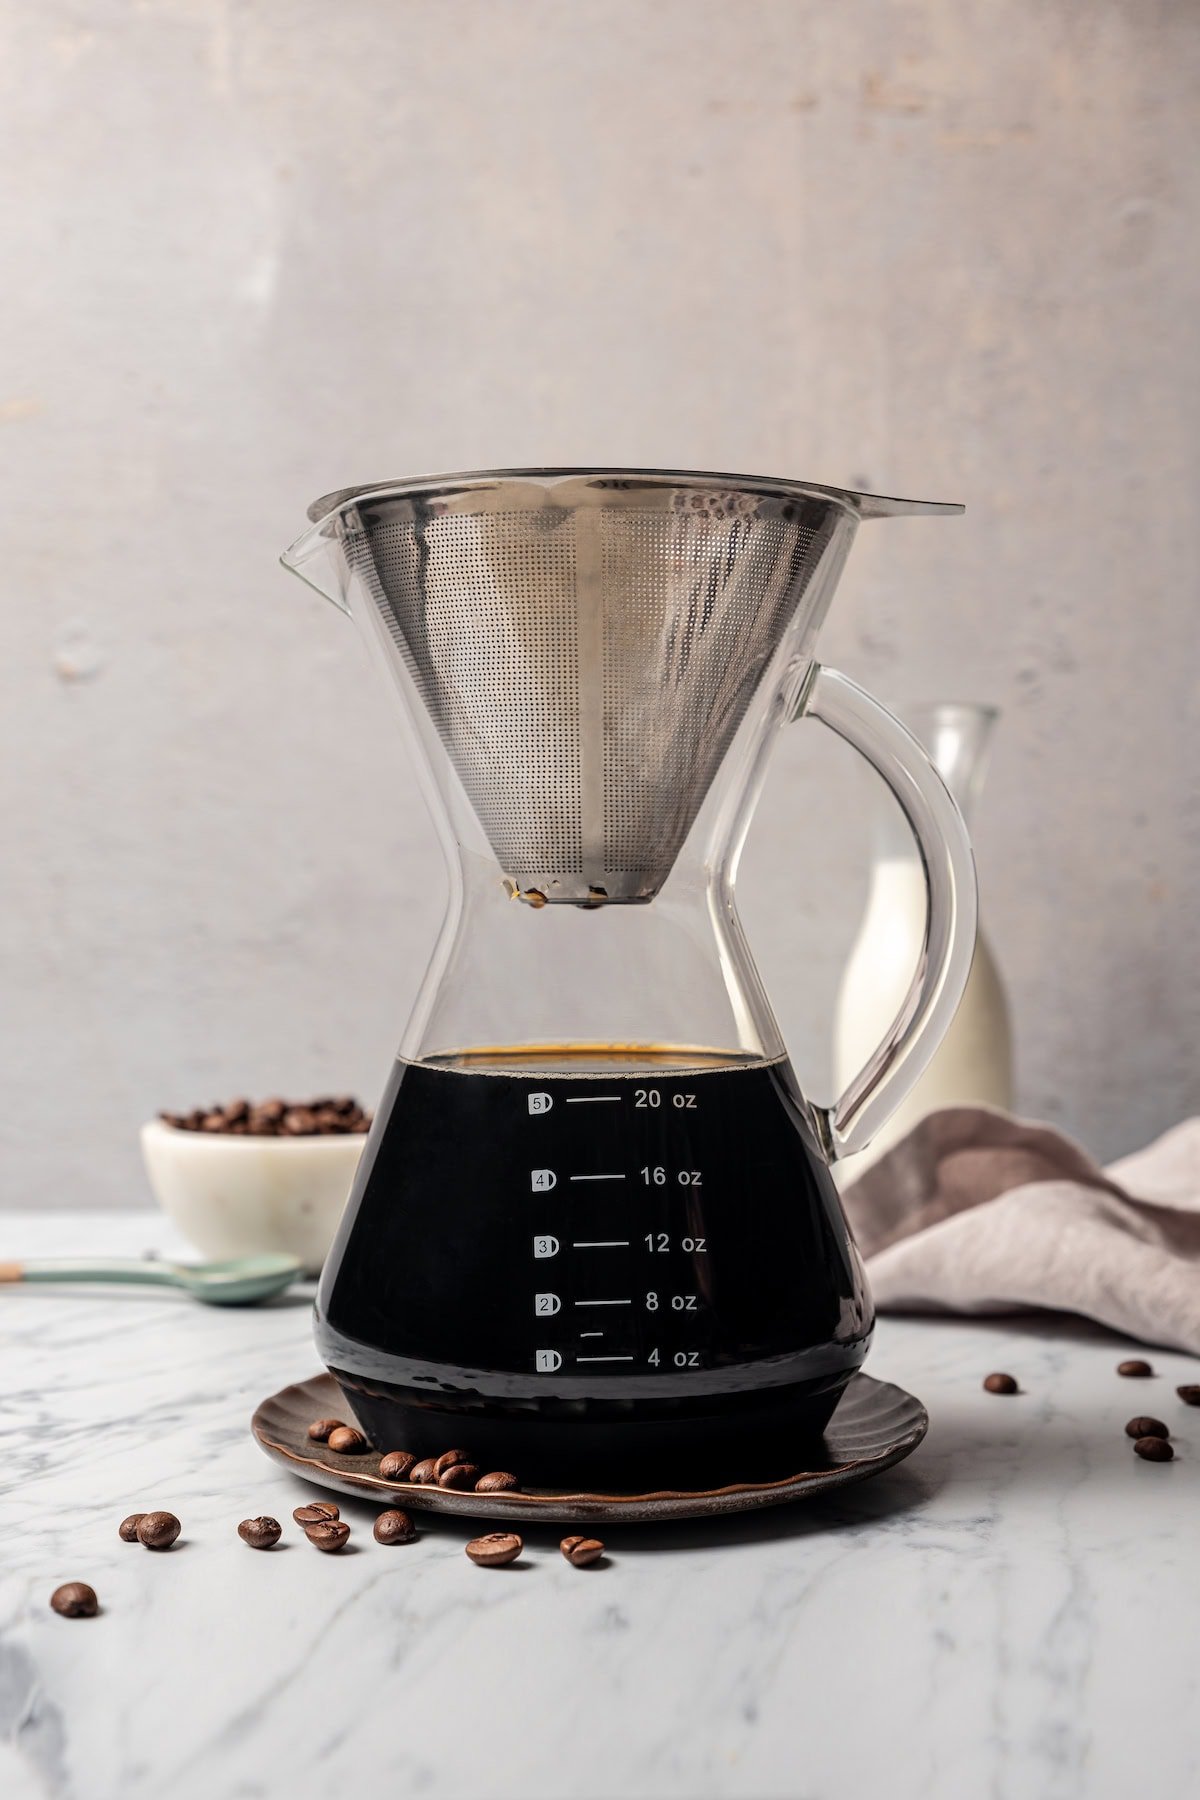 A pour over coffee maker filled with brewed coffee on a countertop next to scattered coffee beans.